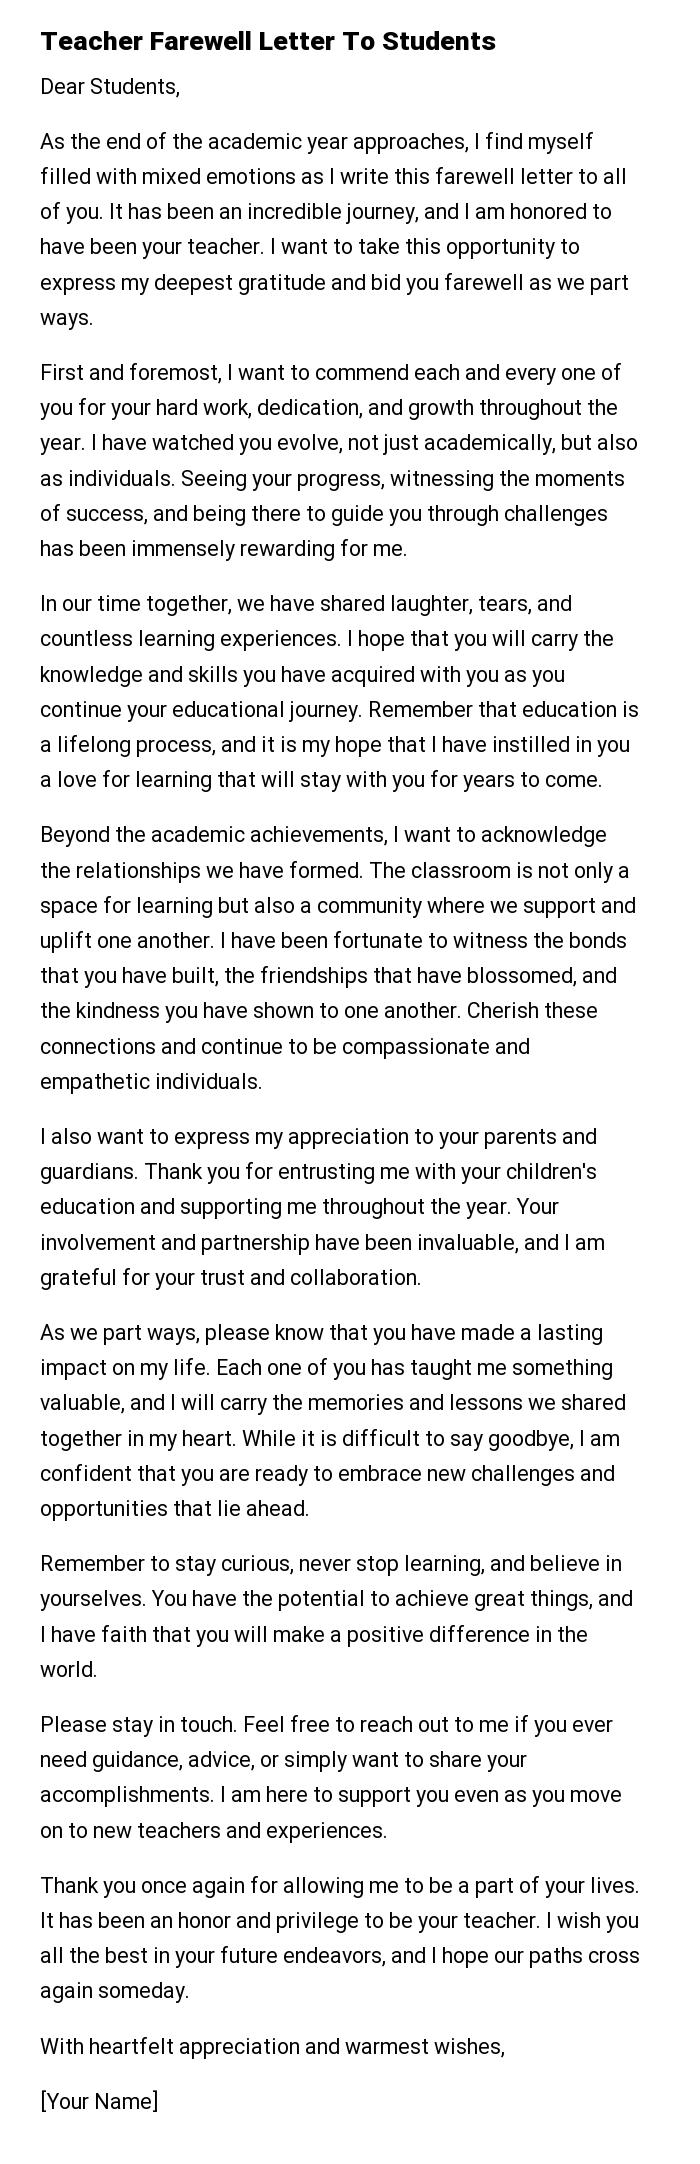 Teacher Farewell Letter To Students